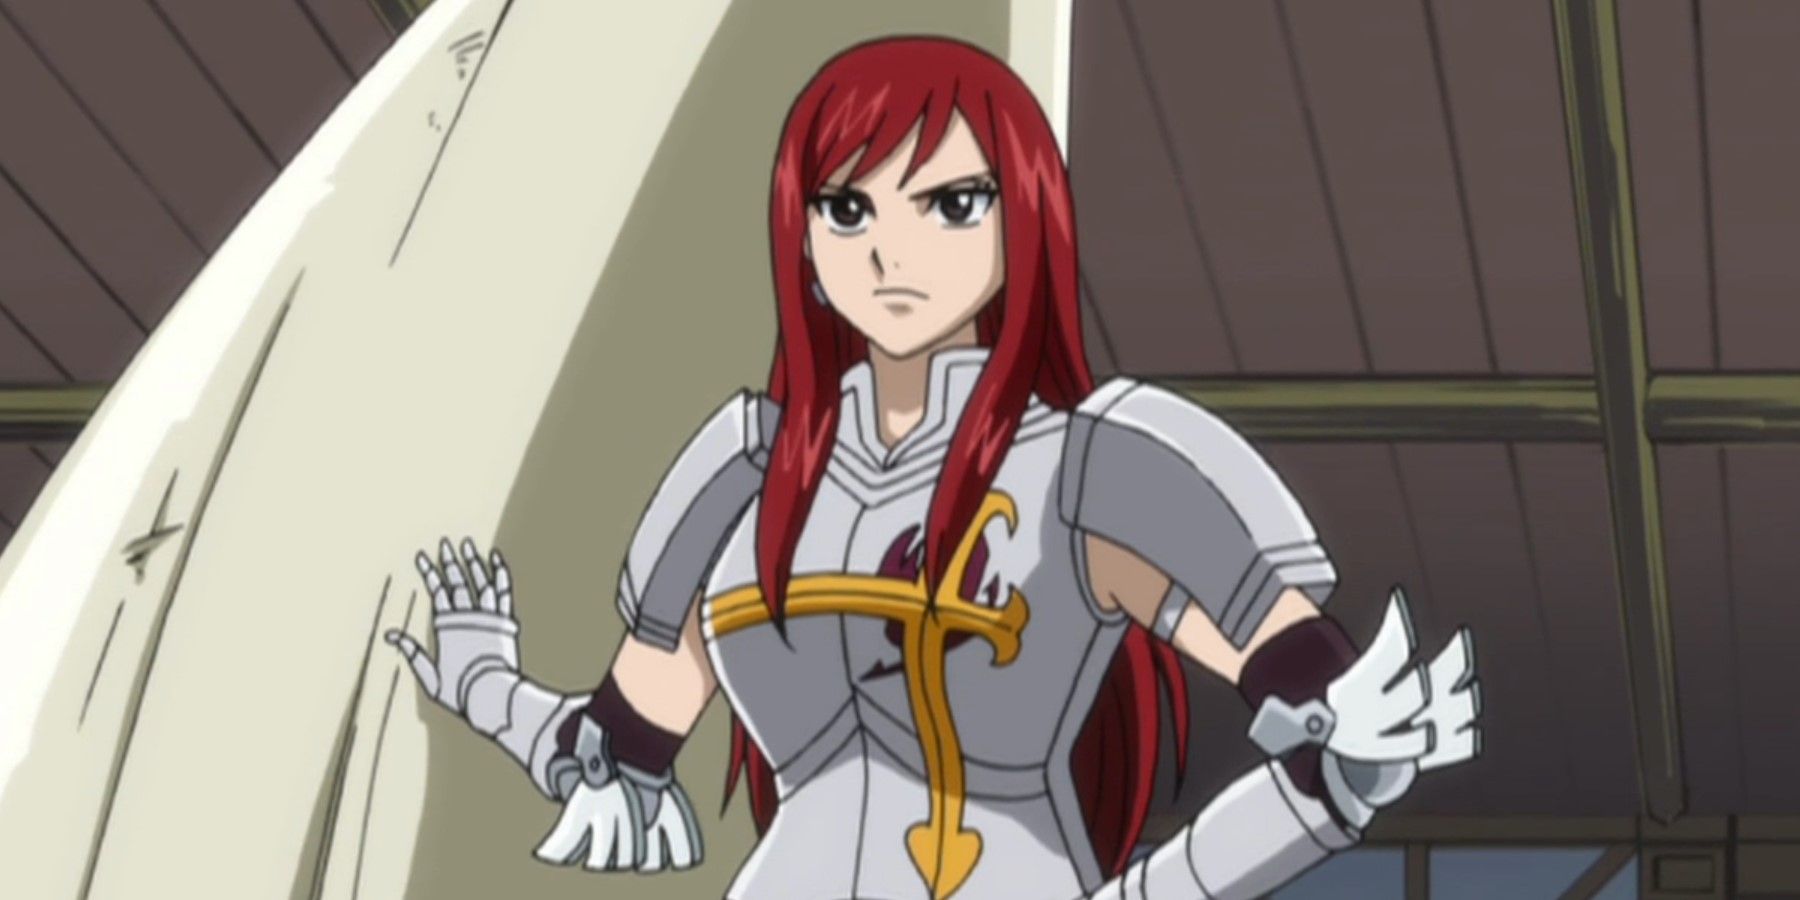 Erza Scarlet with her catch